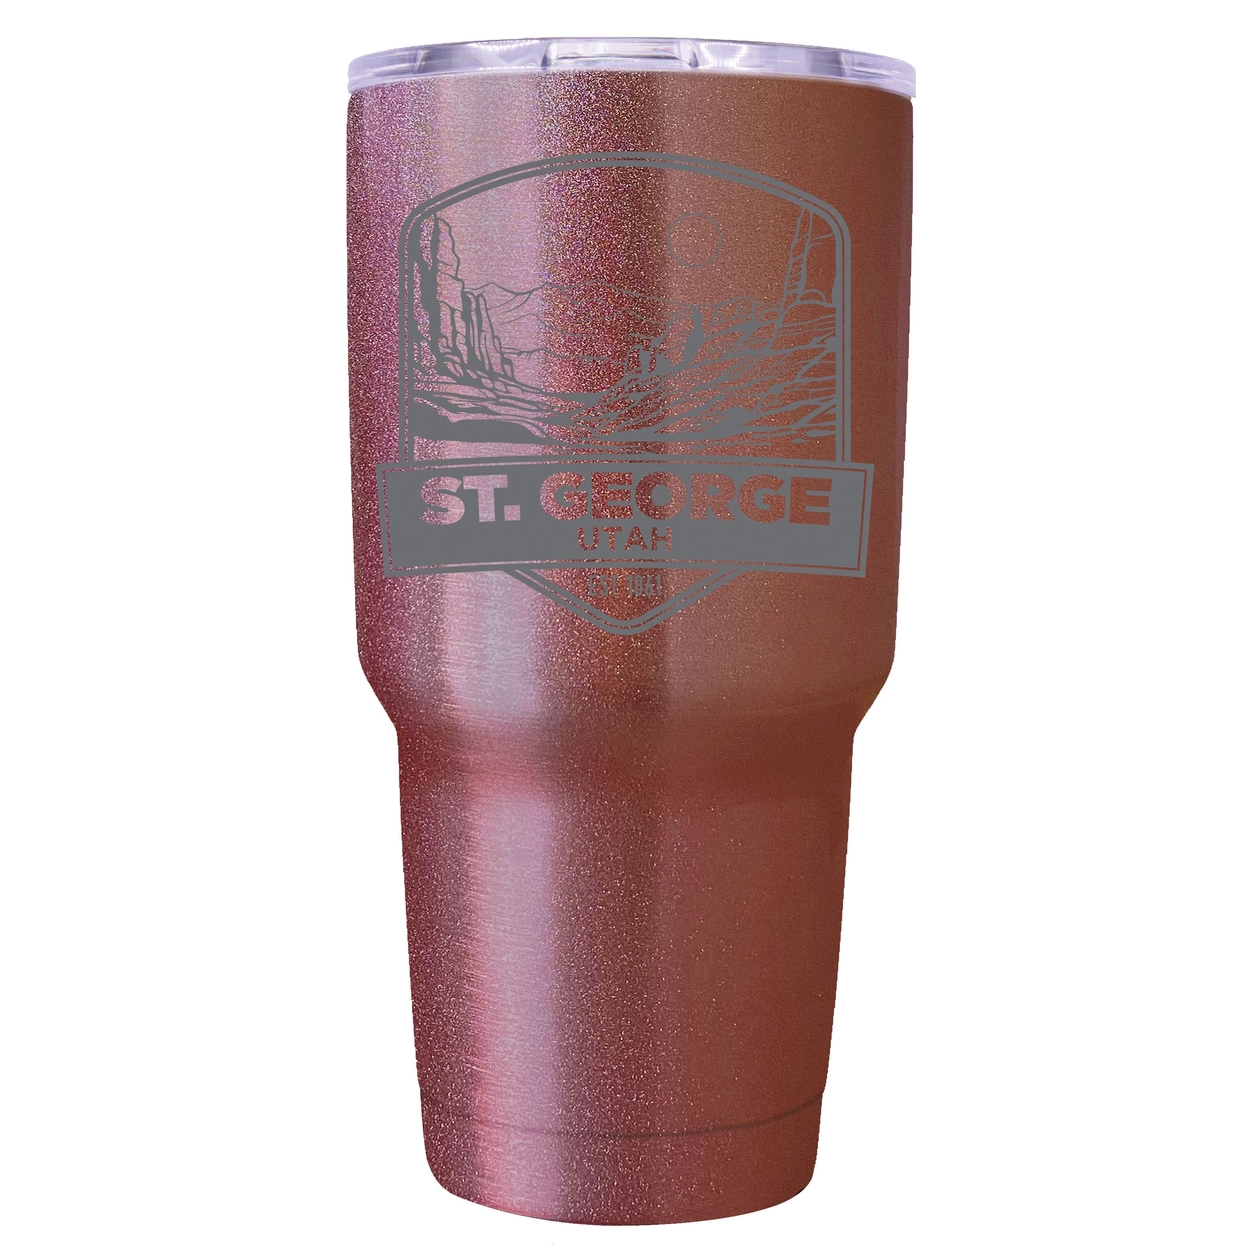 St. George Utah Souvenir 24 Oz Engraved Insulated Stainless Steel Tumbler - Rose Gold,,4-Pack